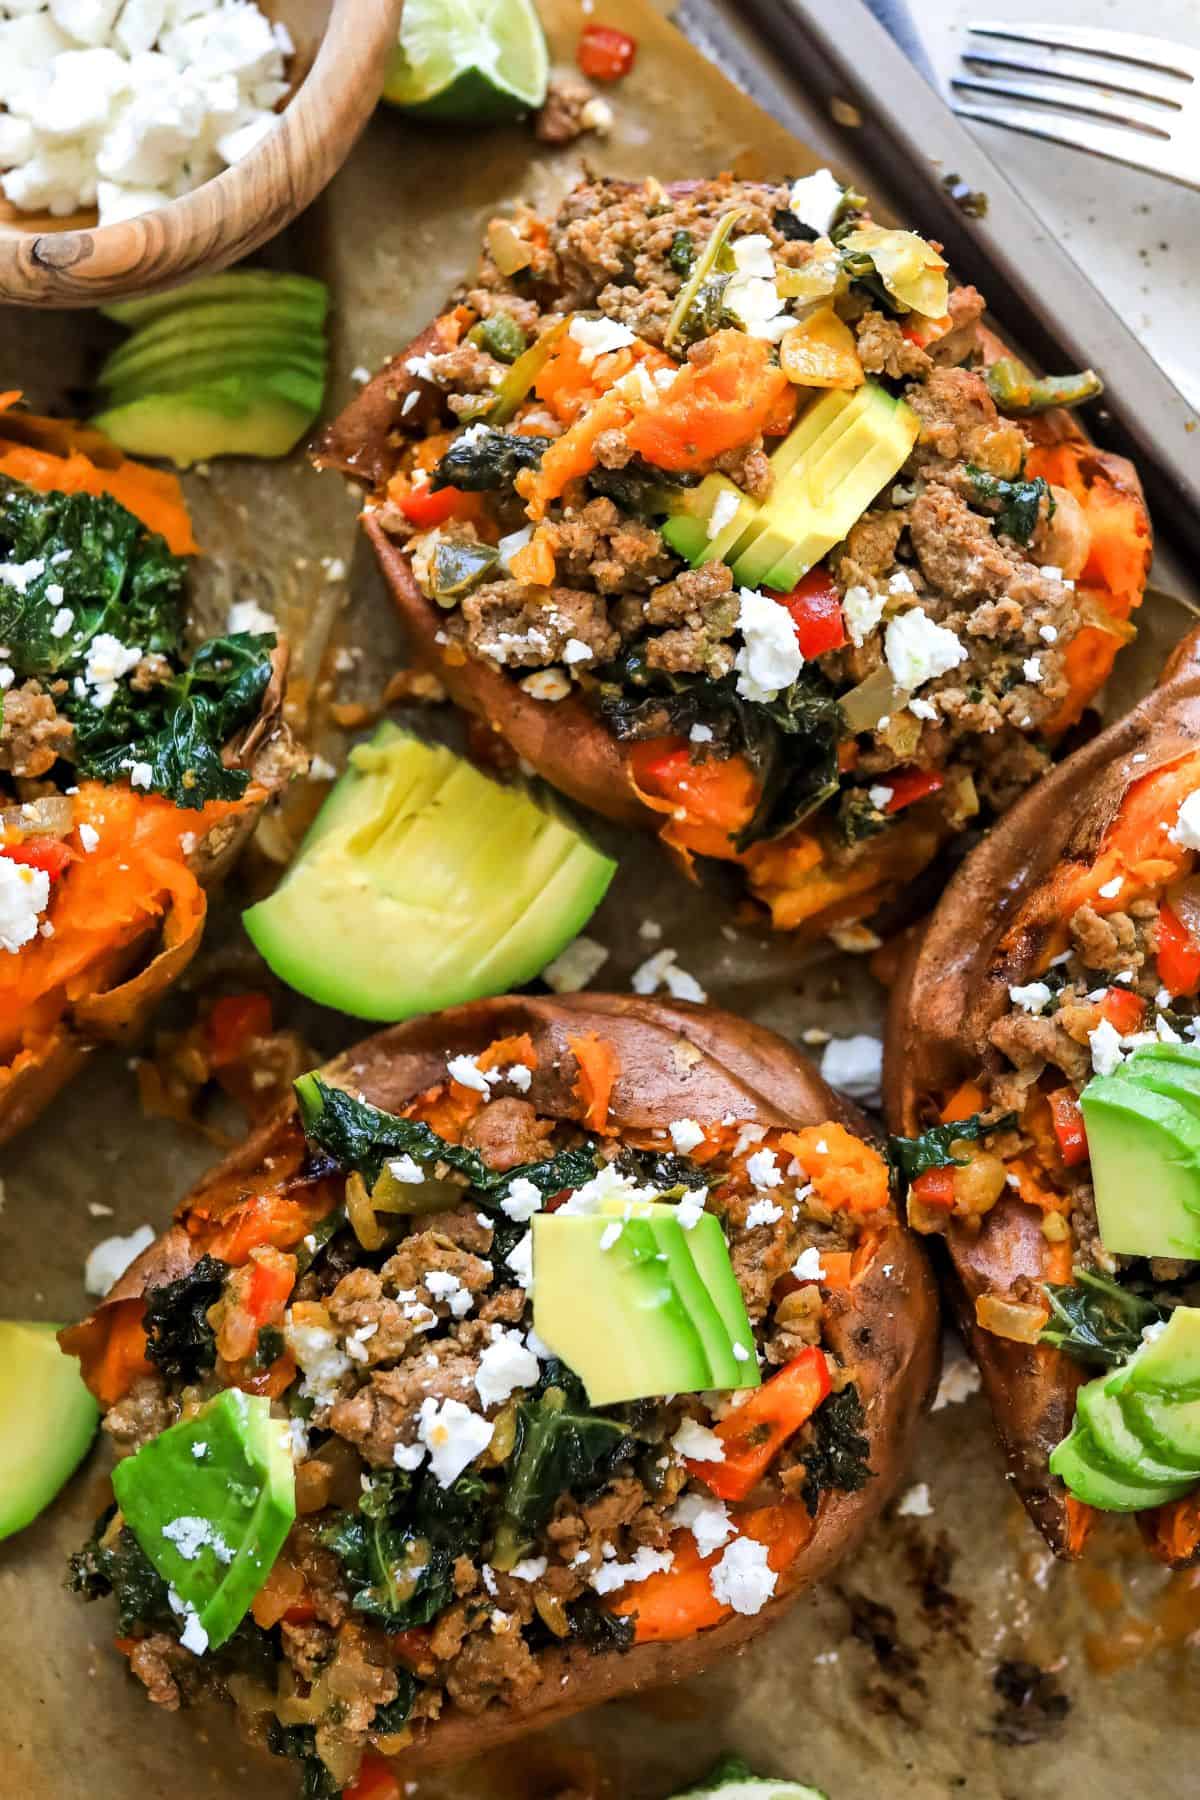 Up close photo of stuffed sweet potatoes with Mexican inspired toppings and avocado.